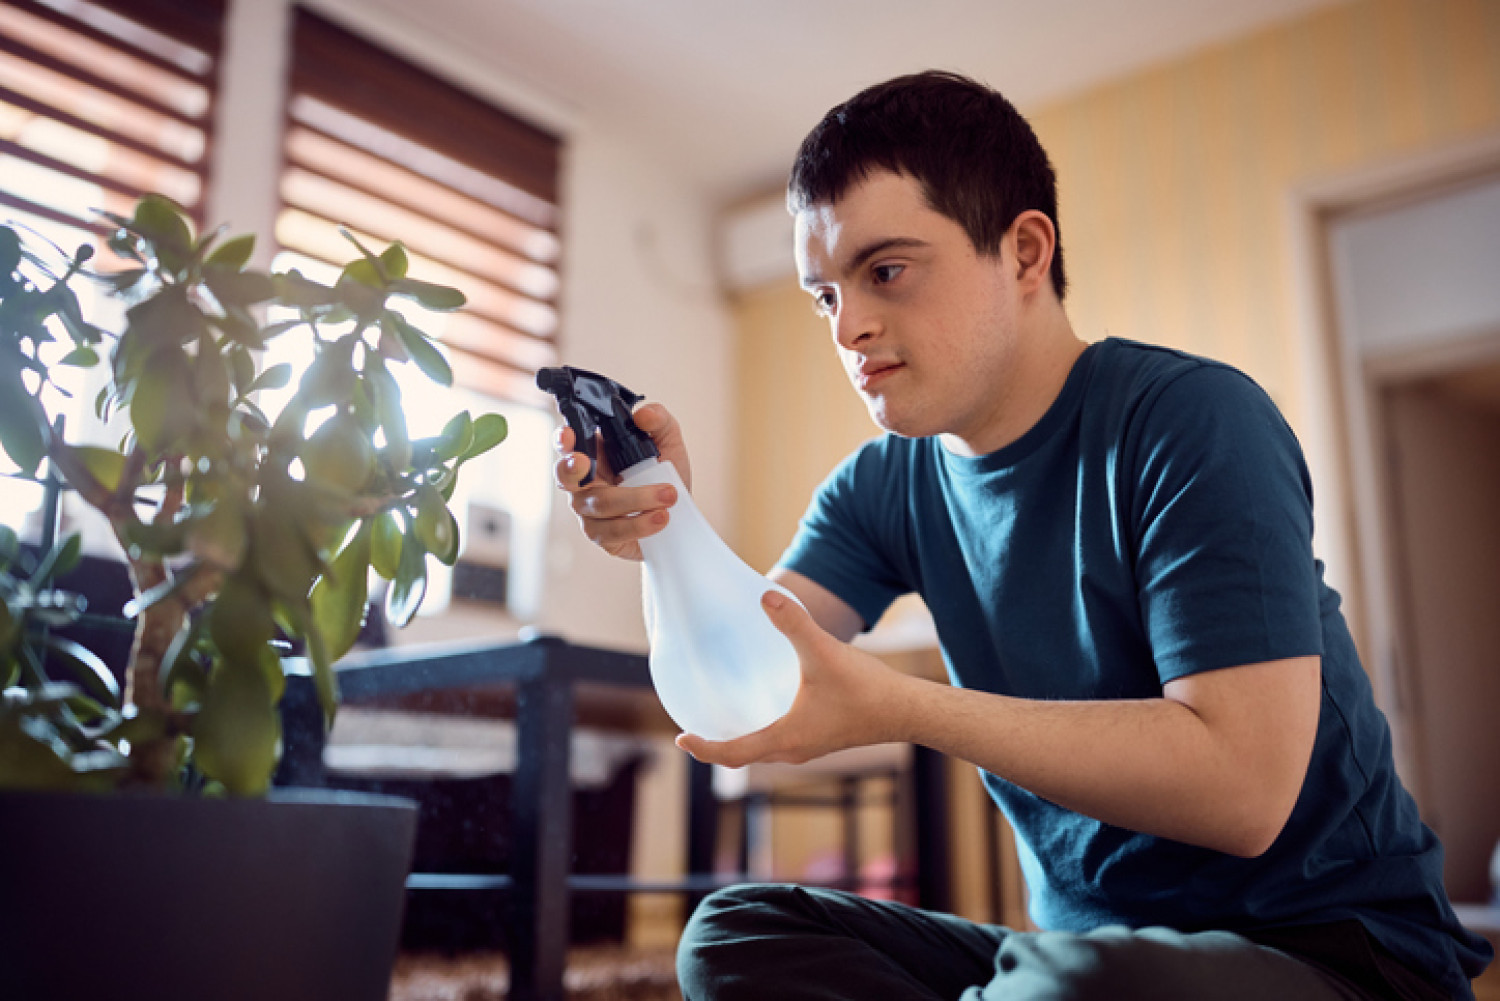 A young man with Down syndrome carefully tending to indoor plants, illustrating the empowerment and daily life skills development supported by NDIS independent living options.